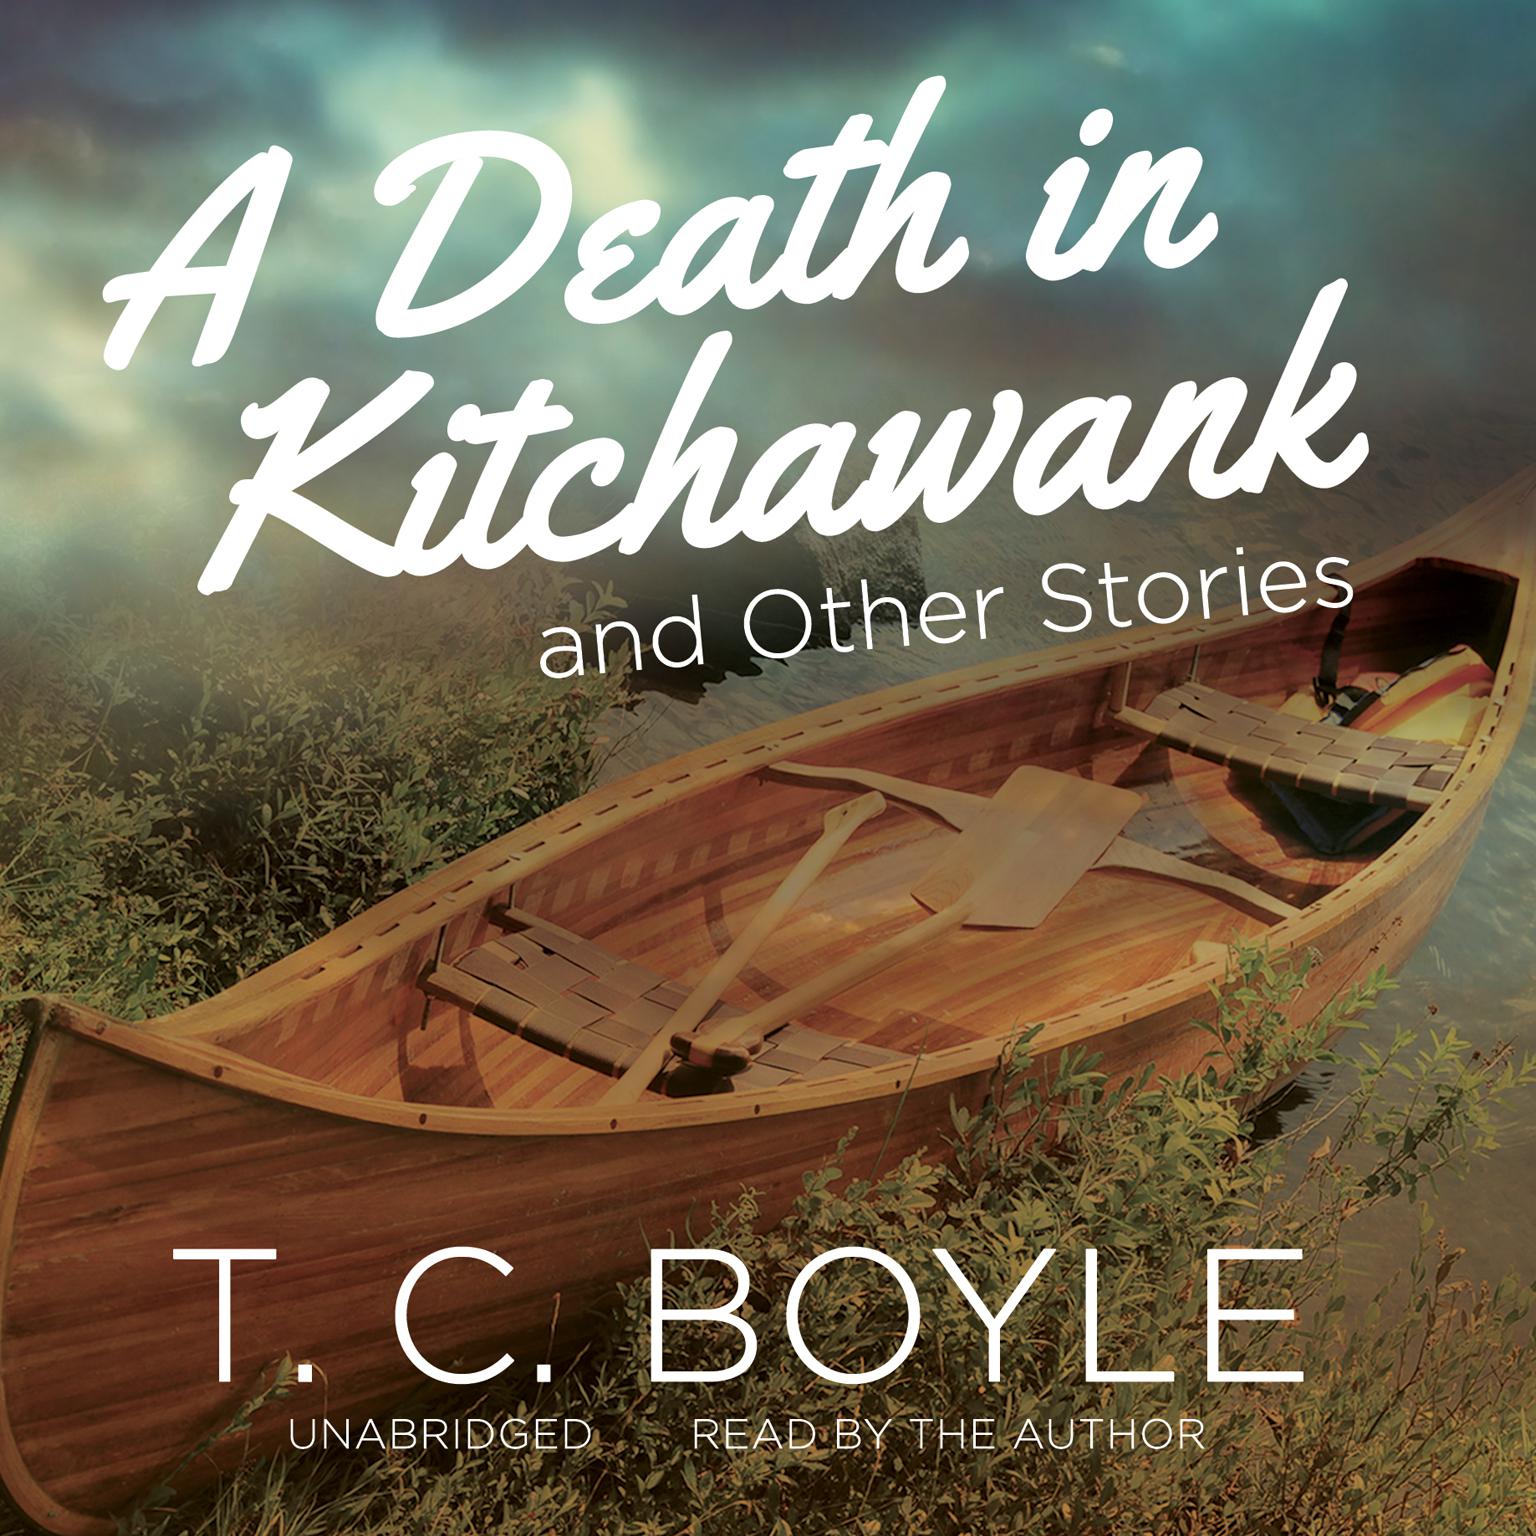 A Death in Kitchawank, and Other Stories Audiobook, by T. C. Boyle